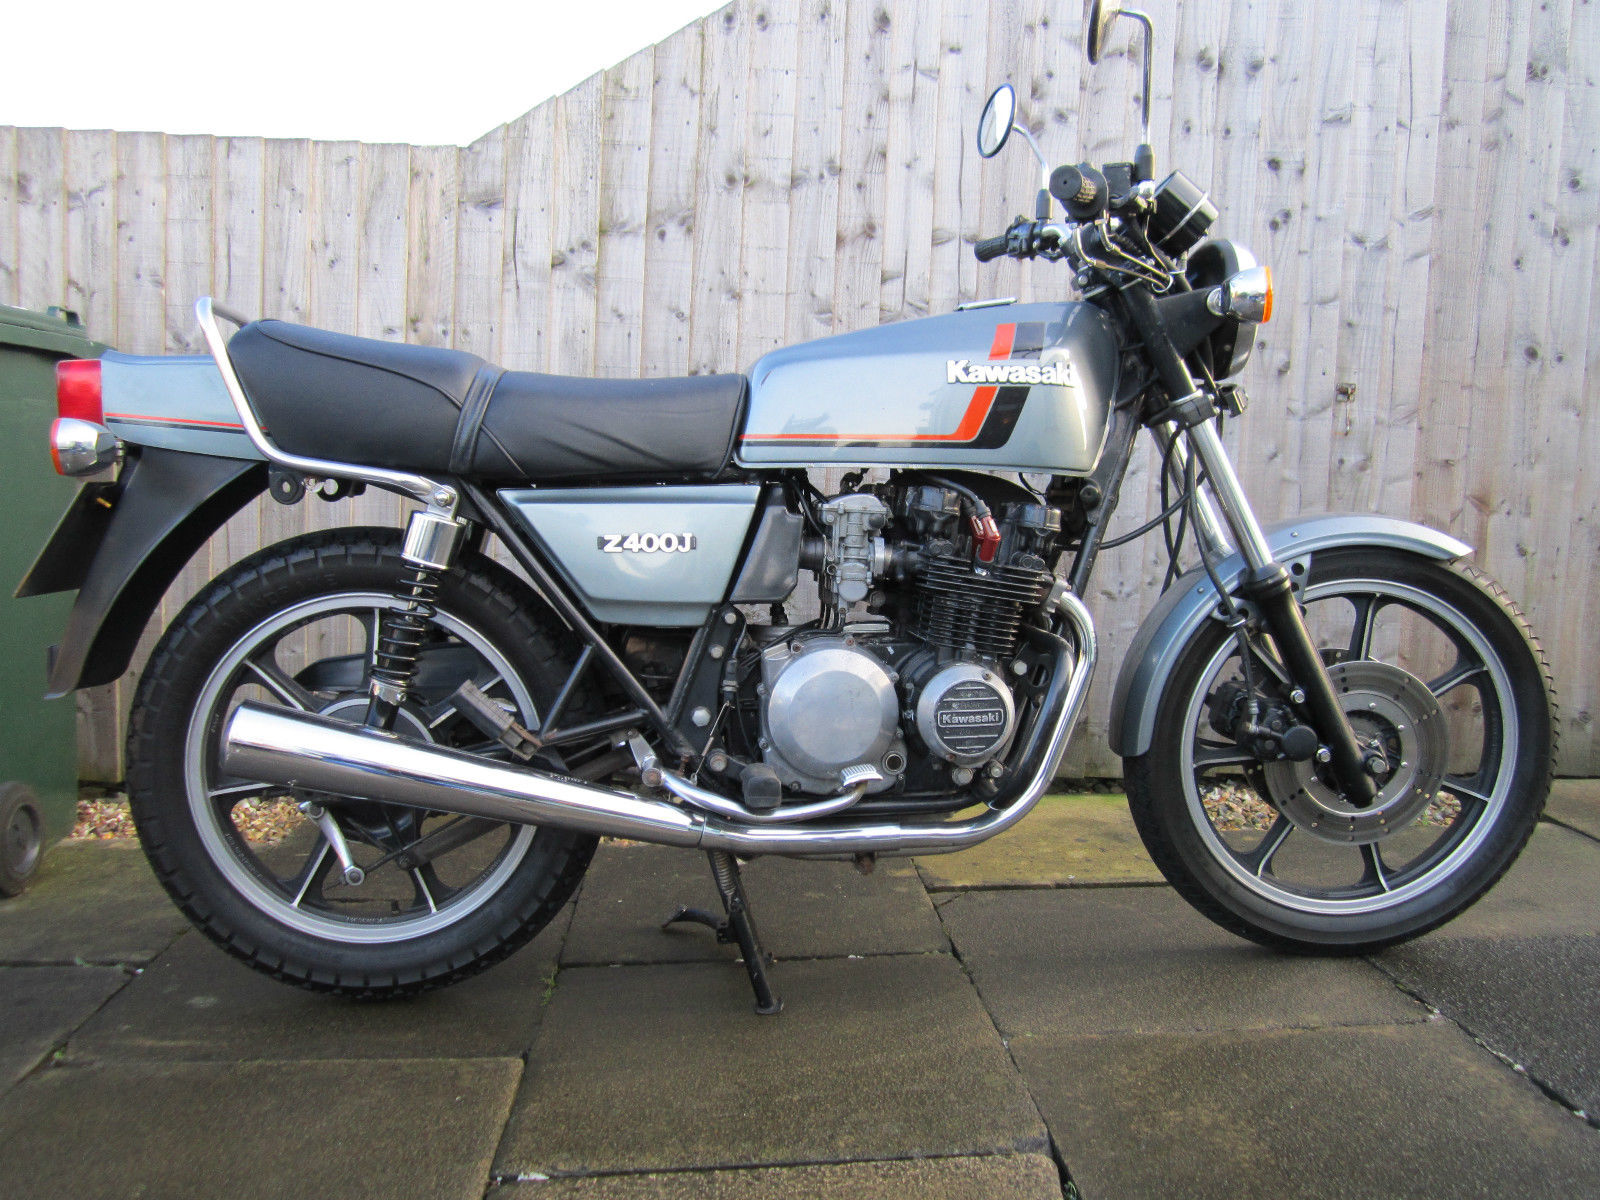 kawasaki z400j BIKE IS NOW SOLD! for looking.